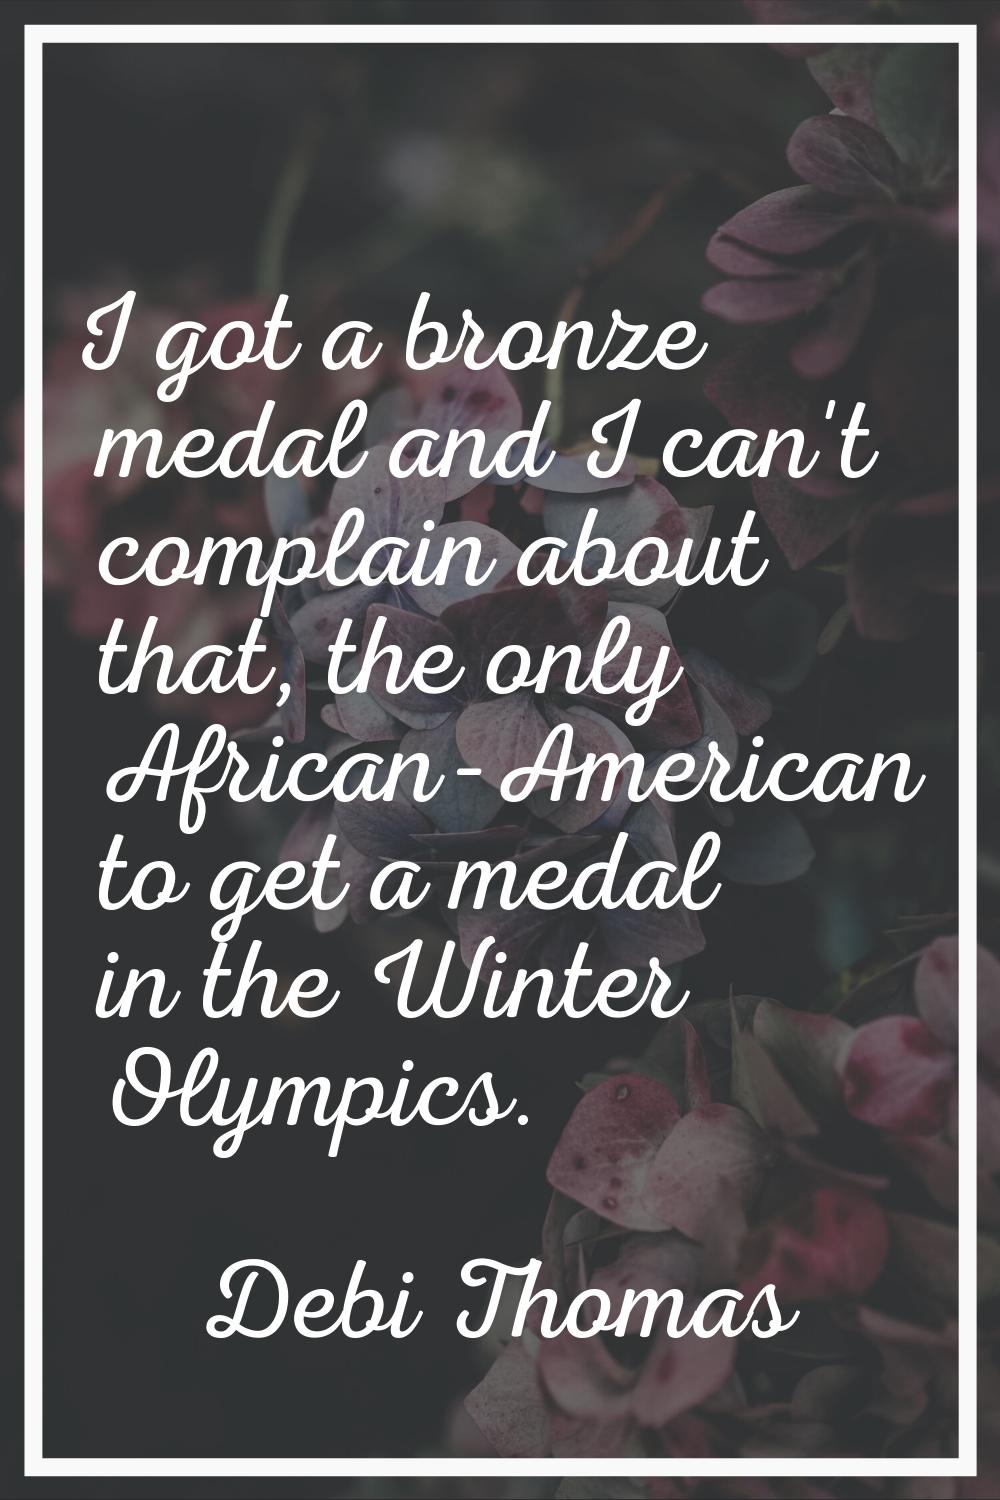 I got a bronze medal and I can't complain about that, the only African-American to get a medal in t